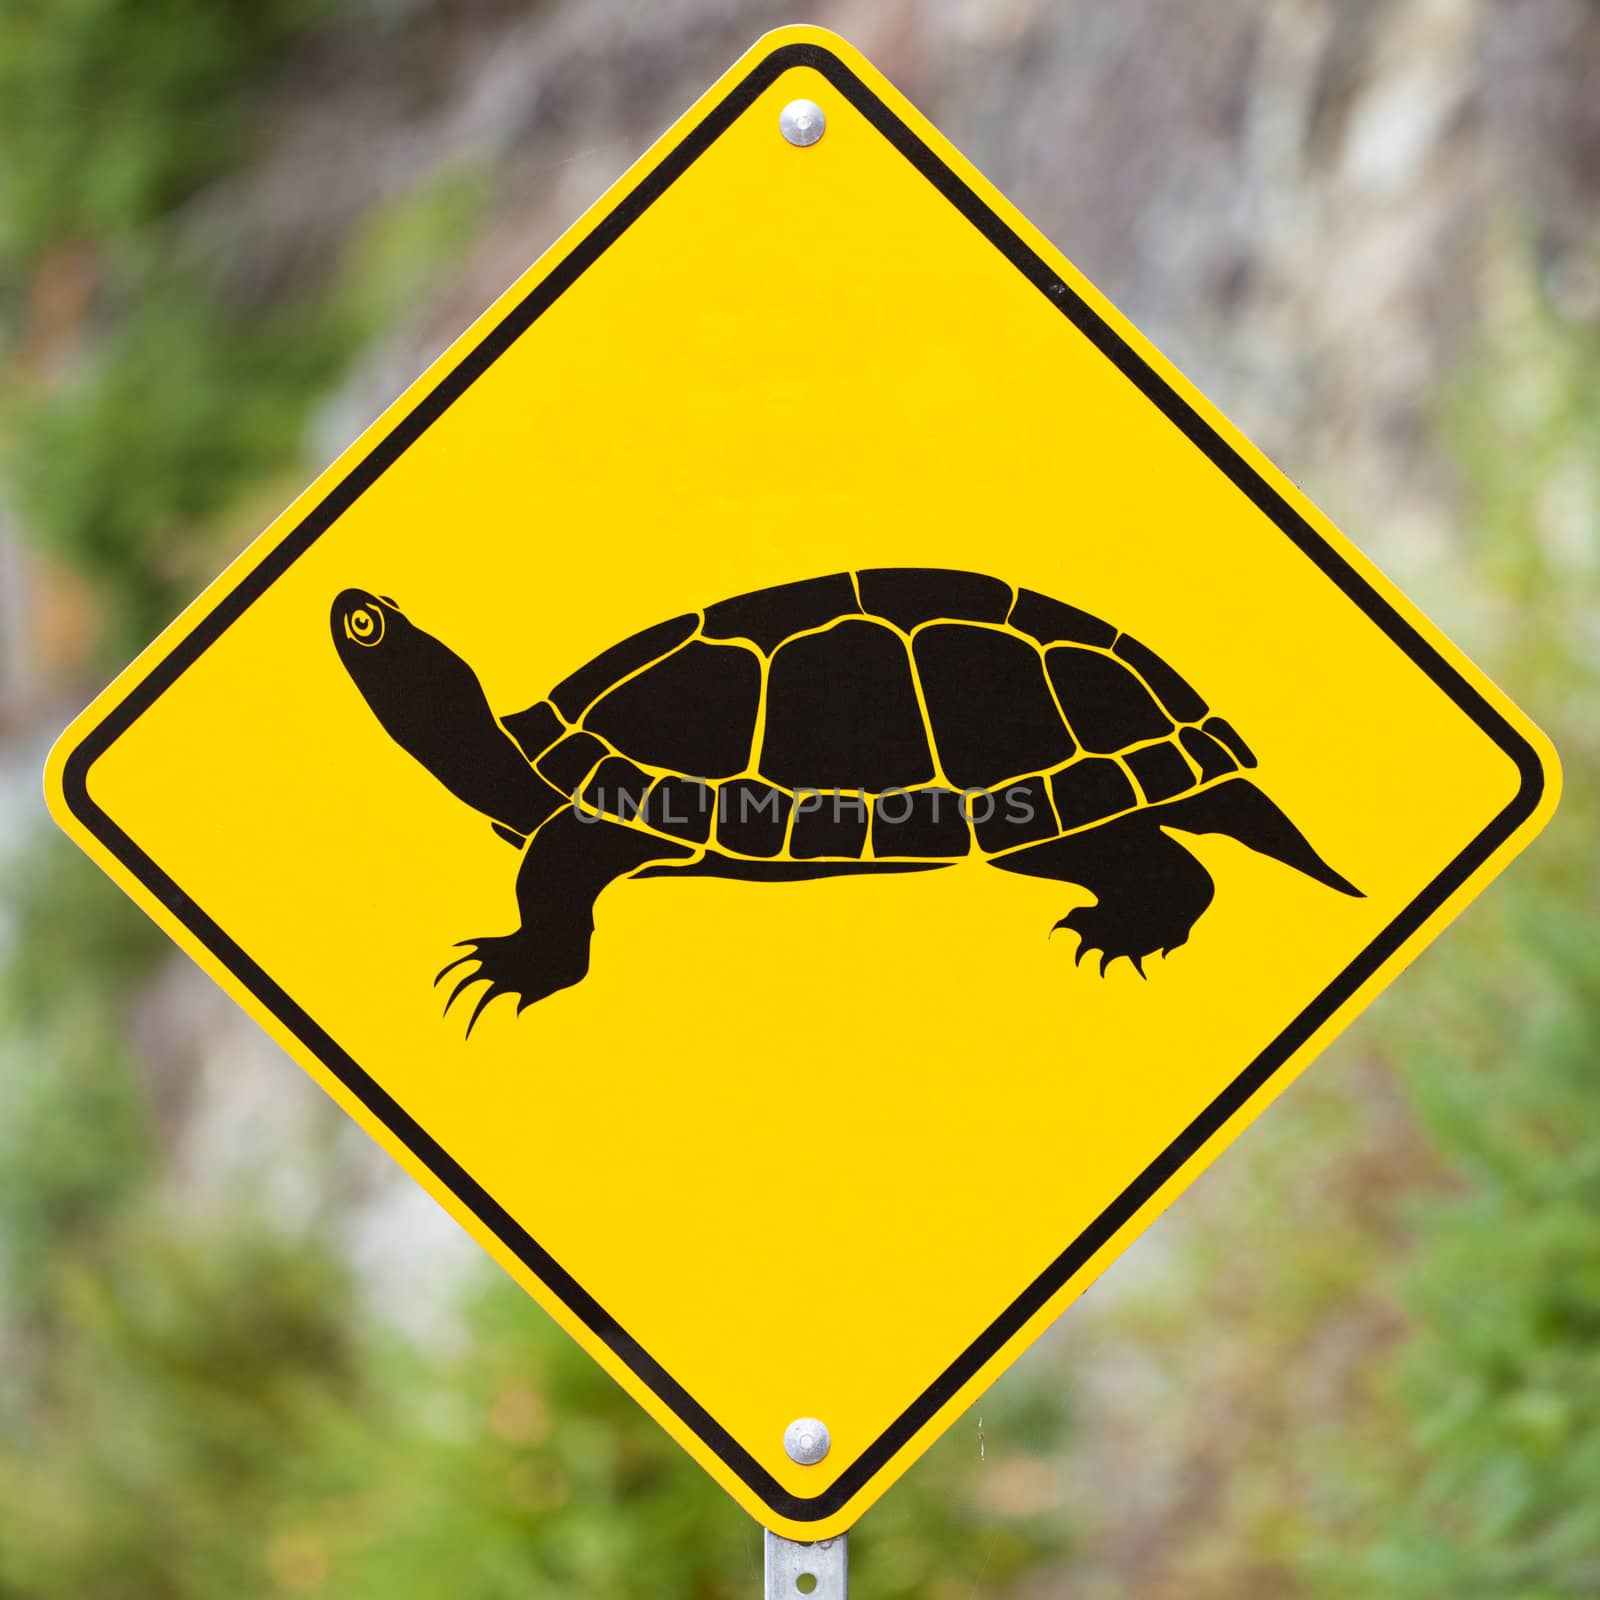 Animal Road Sign - Attention Turtles Crossing - on blurry forest background